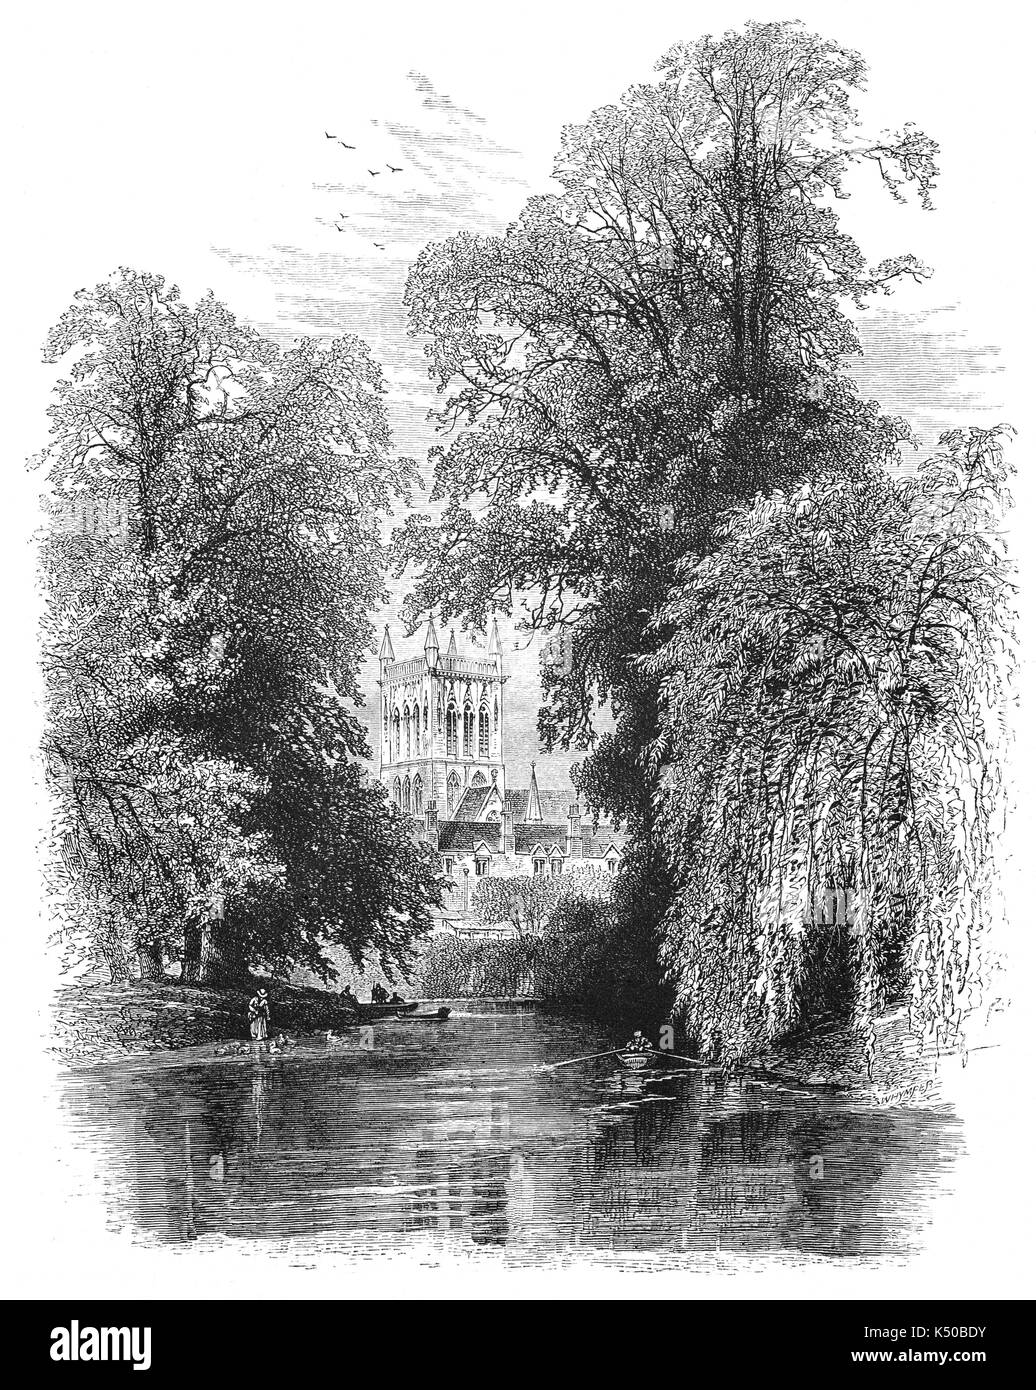 1870: View from the River Cam of St John's CollegeTower.  A constituent college of the University of Cambridge it was founded by Lady Margaret Beaufort. In constitutional terms, the college is a charitable corporation established by a charter dated 9 April 1511. The aims of the college, as specified by its Statutes, are the promotion of education, religion, learning and research.England Stock Photo